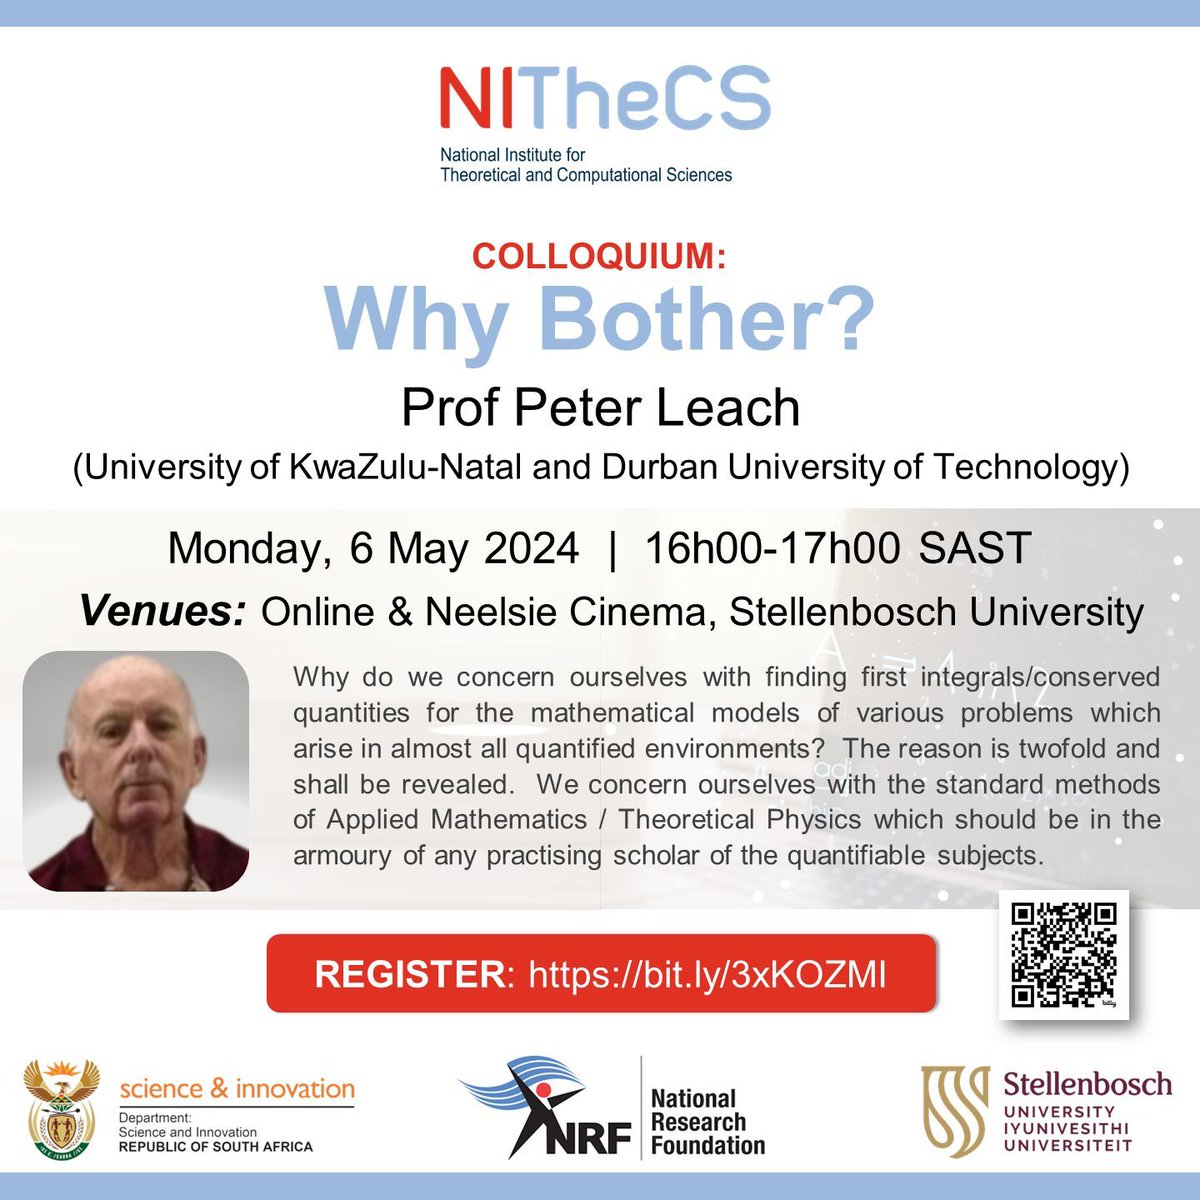 NITheCS Colloquium: 'Why Bother?' Prof Peter Leach (UKZN & DUT) - Mon, 6 May @ 16h00 SAST. Attend online or in person at the Neelsie Cinema, Stellenbosch University. Cheese & wine will be served at the venue. buff.ly/3Whk6tA #appliedmaths #theoreticalphysics #mathematics